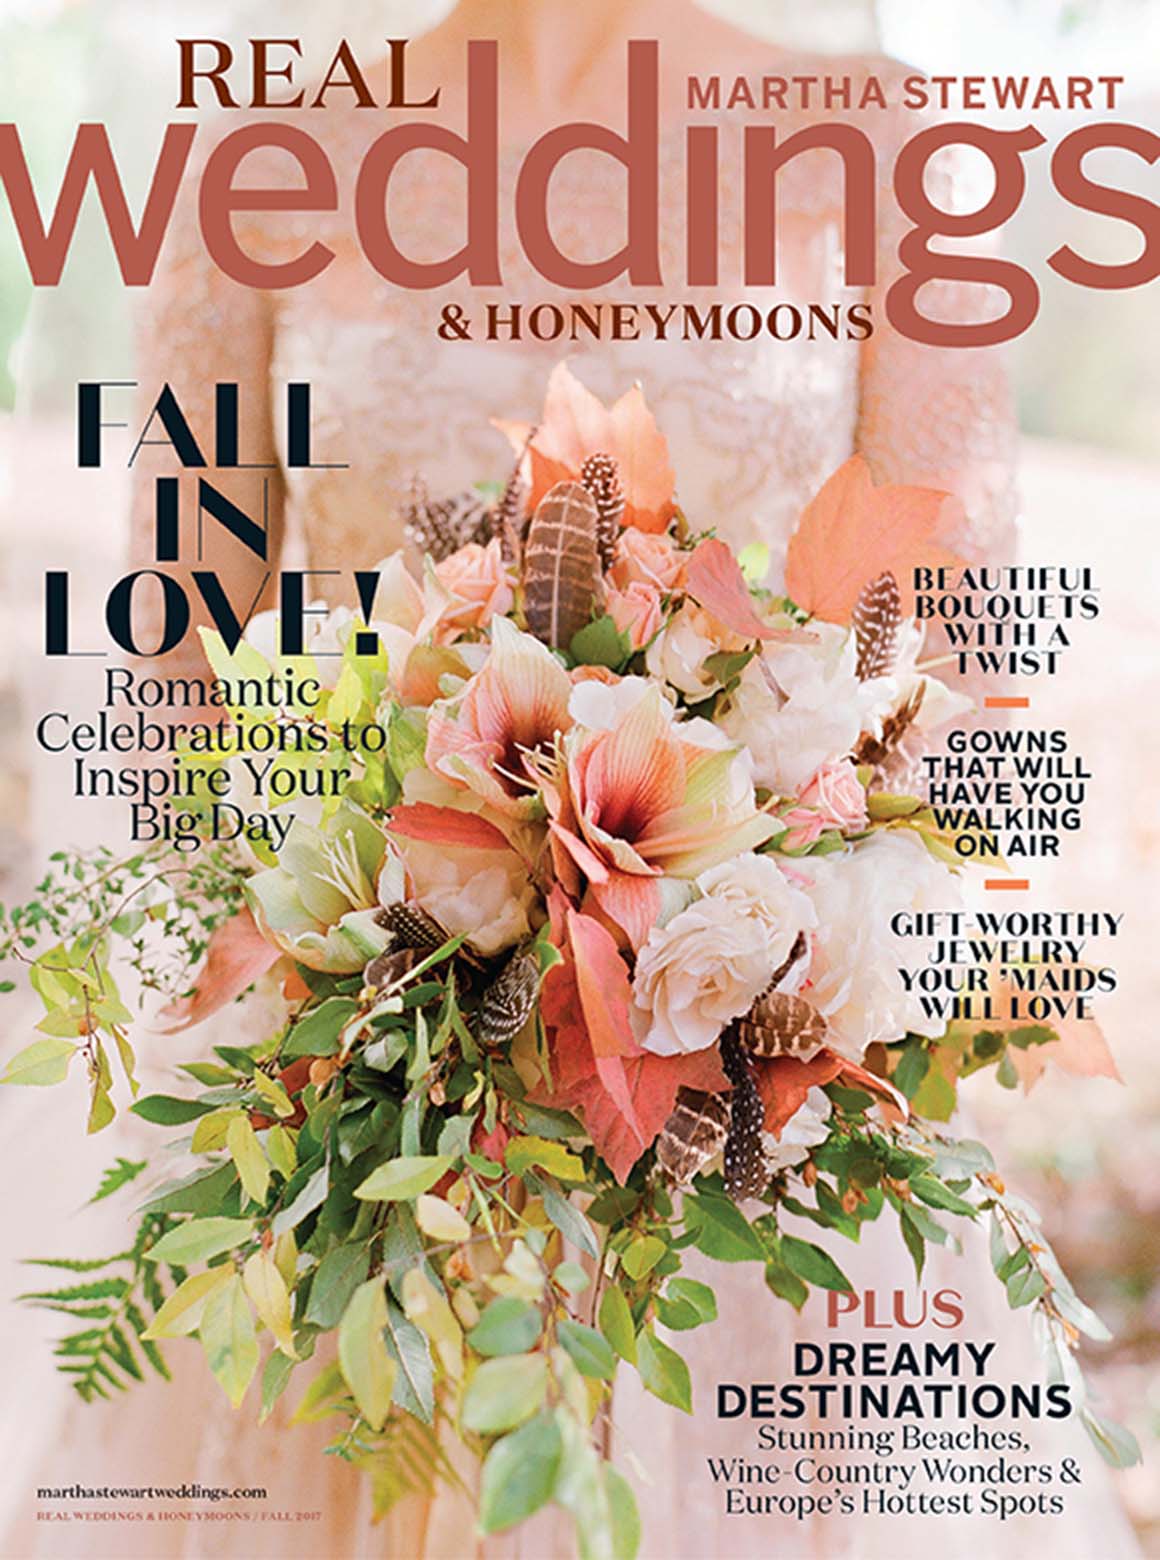 Fall 2017 cover of Martha Stewart Real Weddings titled "Fall in love! Romantic celebrations to inspire your big day," featuring a peach and pink toned bouquet with light green mixed greenery.